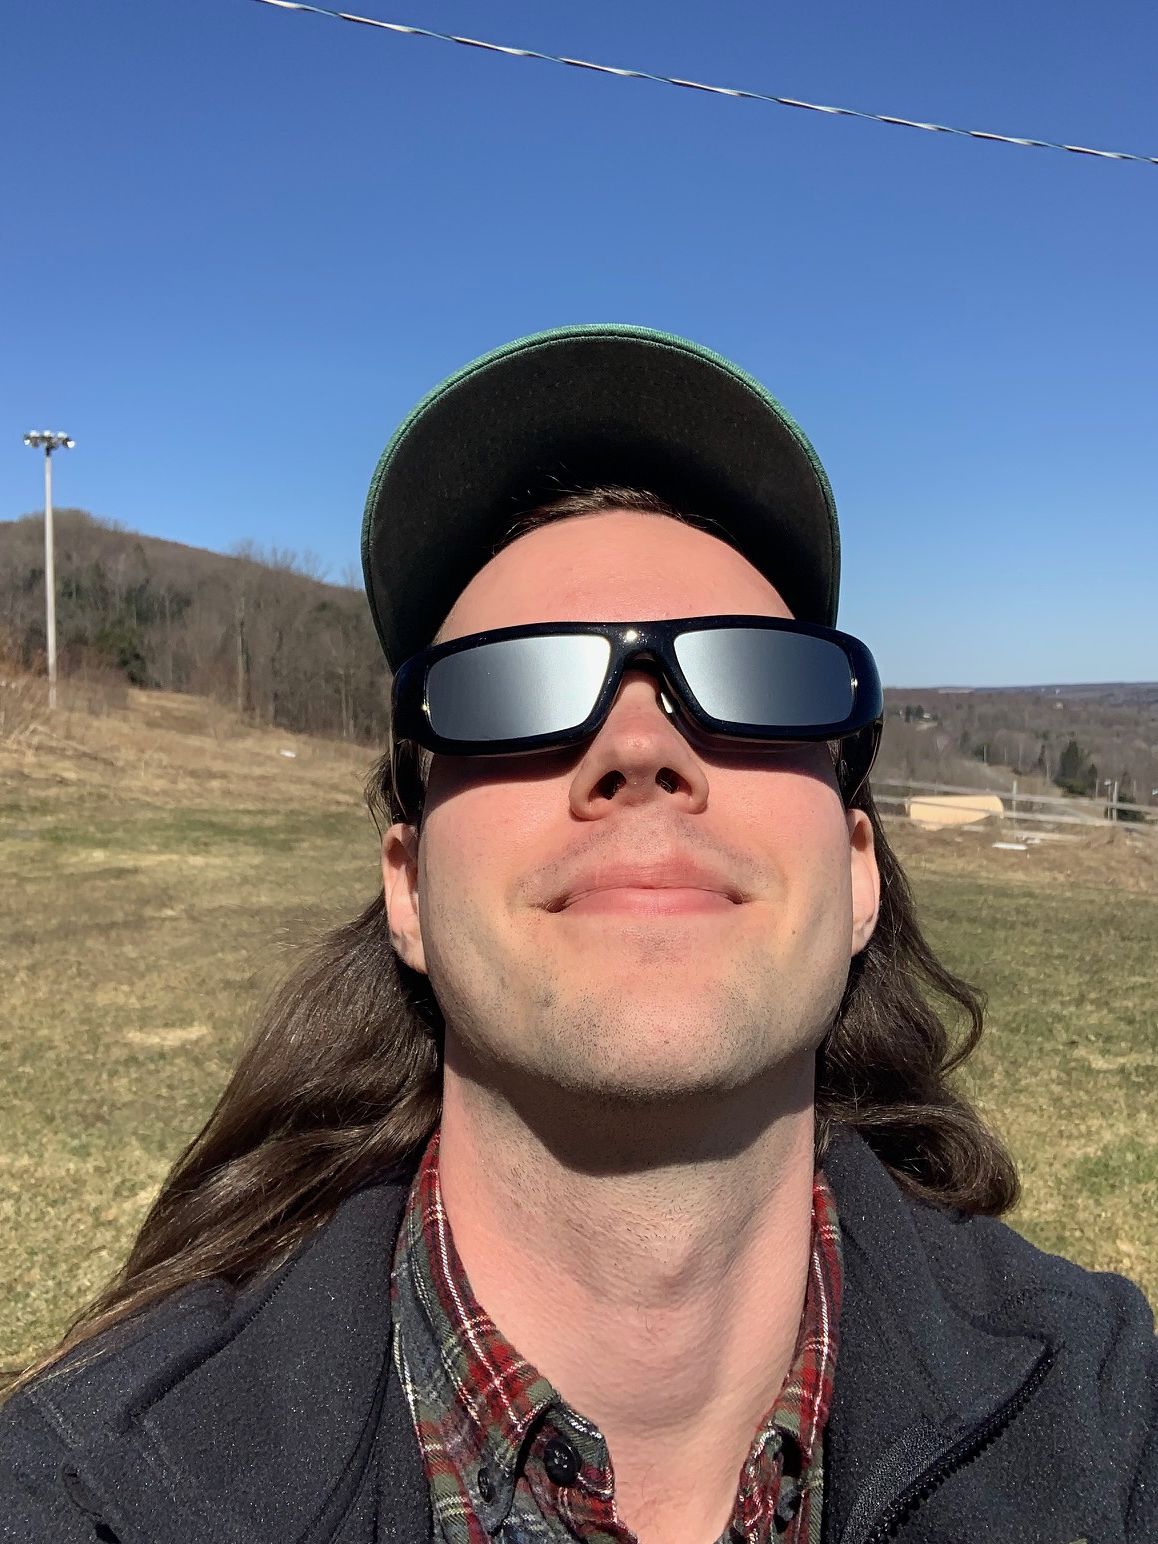 Me with eclipse glasses on a hill, looking up at the sun.